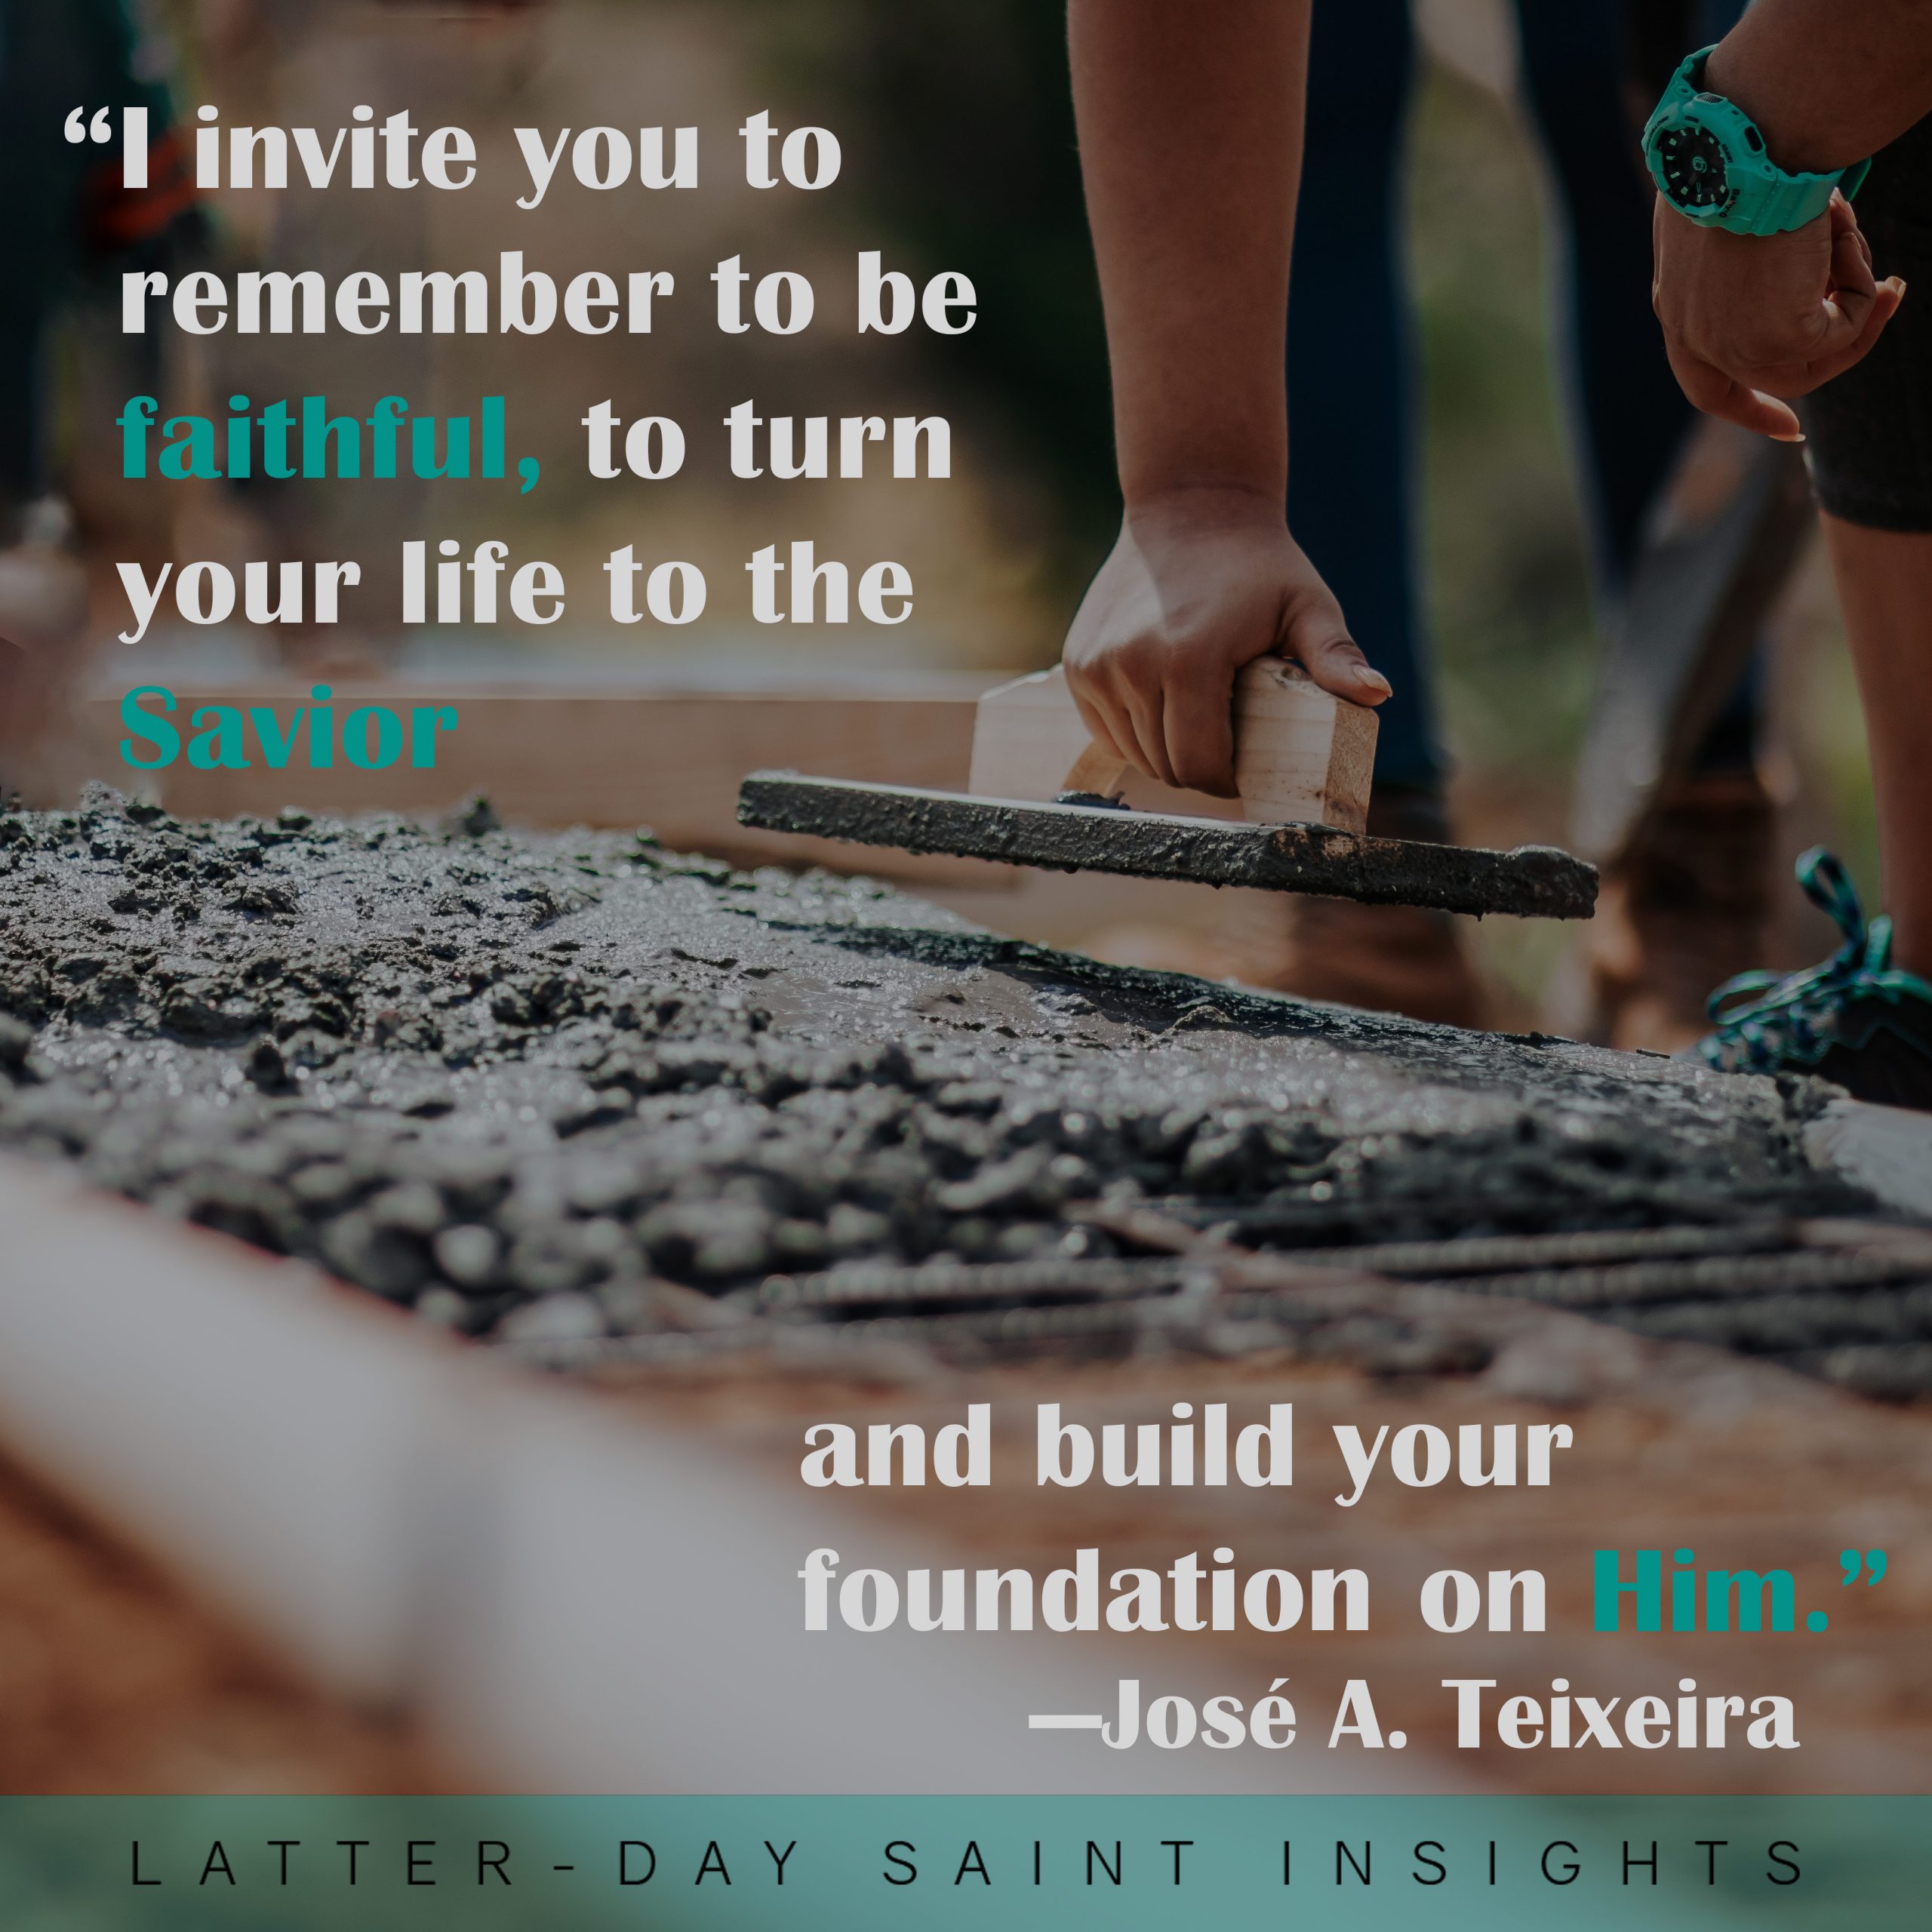 “I invite you to remember to be faithful, to turn your life to the Savior and build your foundation on Him.” –Elder José A. Teixeira